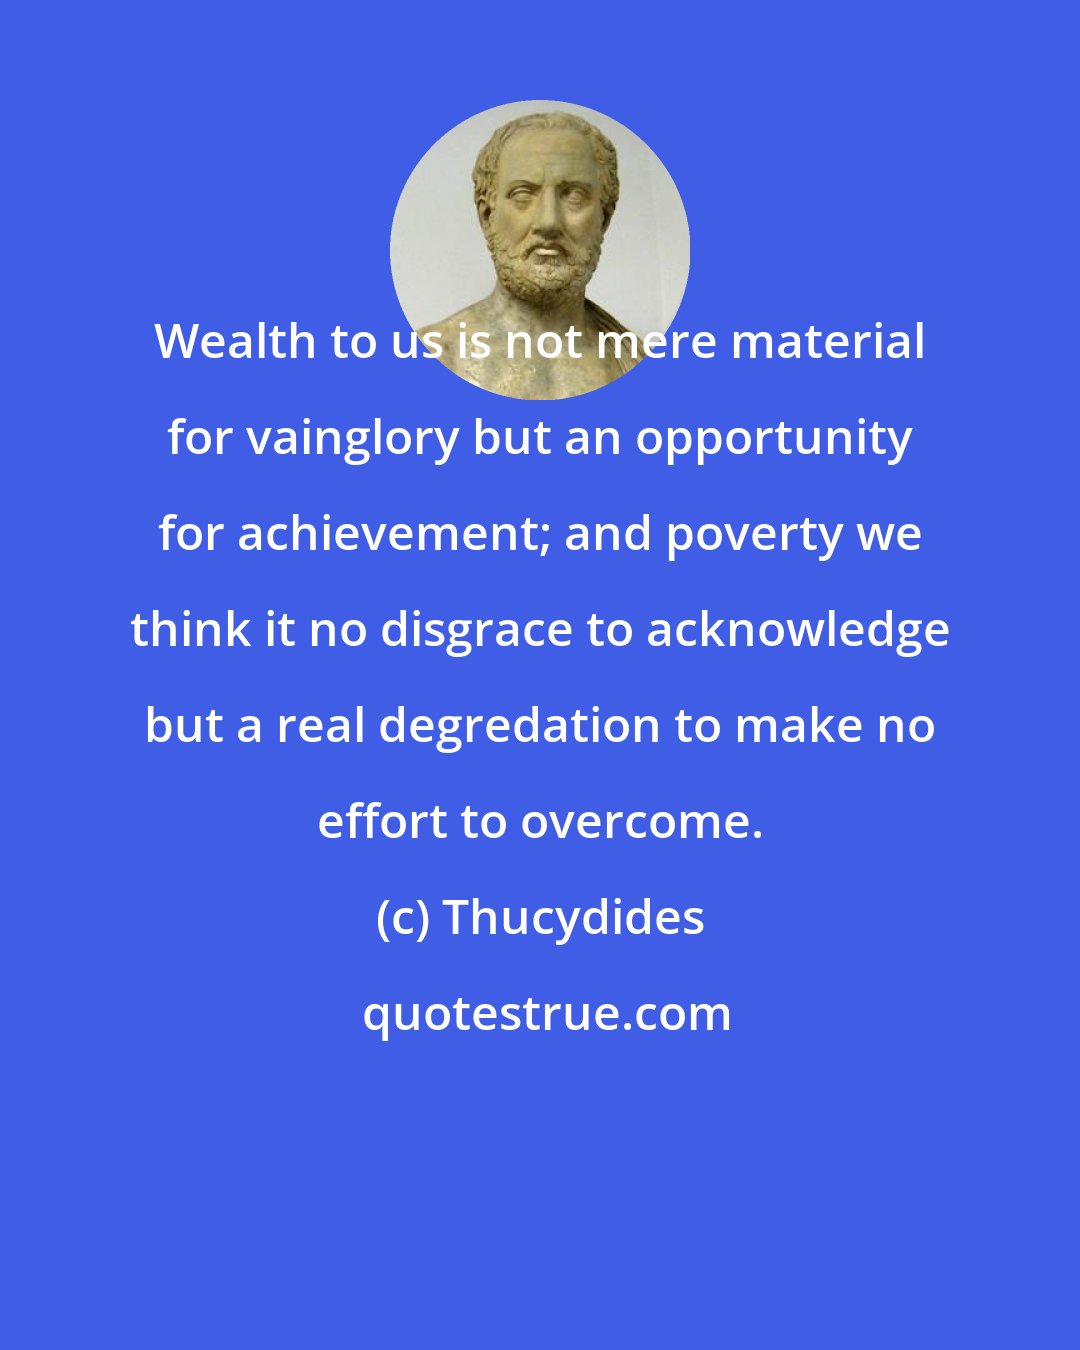 Thucydides: Wealth to us is not mere material for vainglory but an opportunity for achievement; and poverty we think it no disgrace to acknowledge but a real degredation to make no effort to overcome.